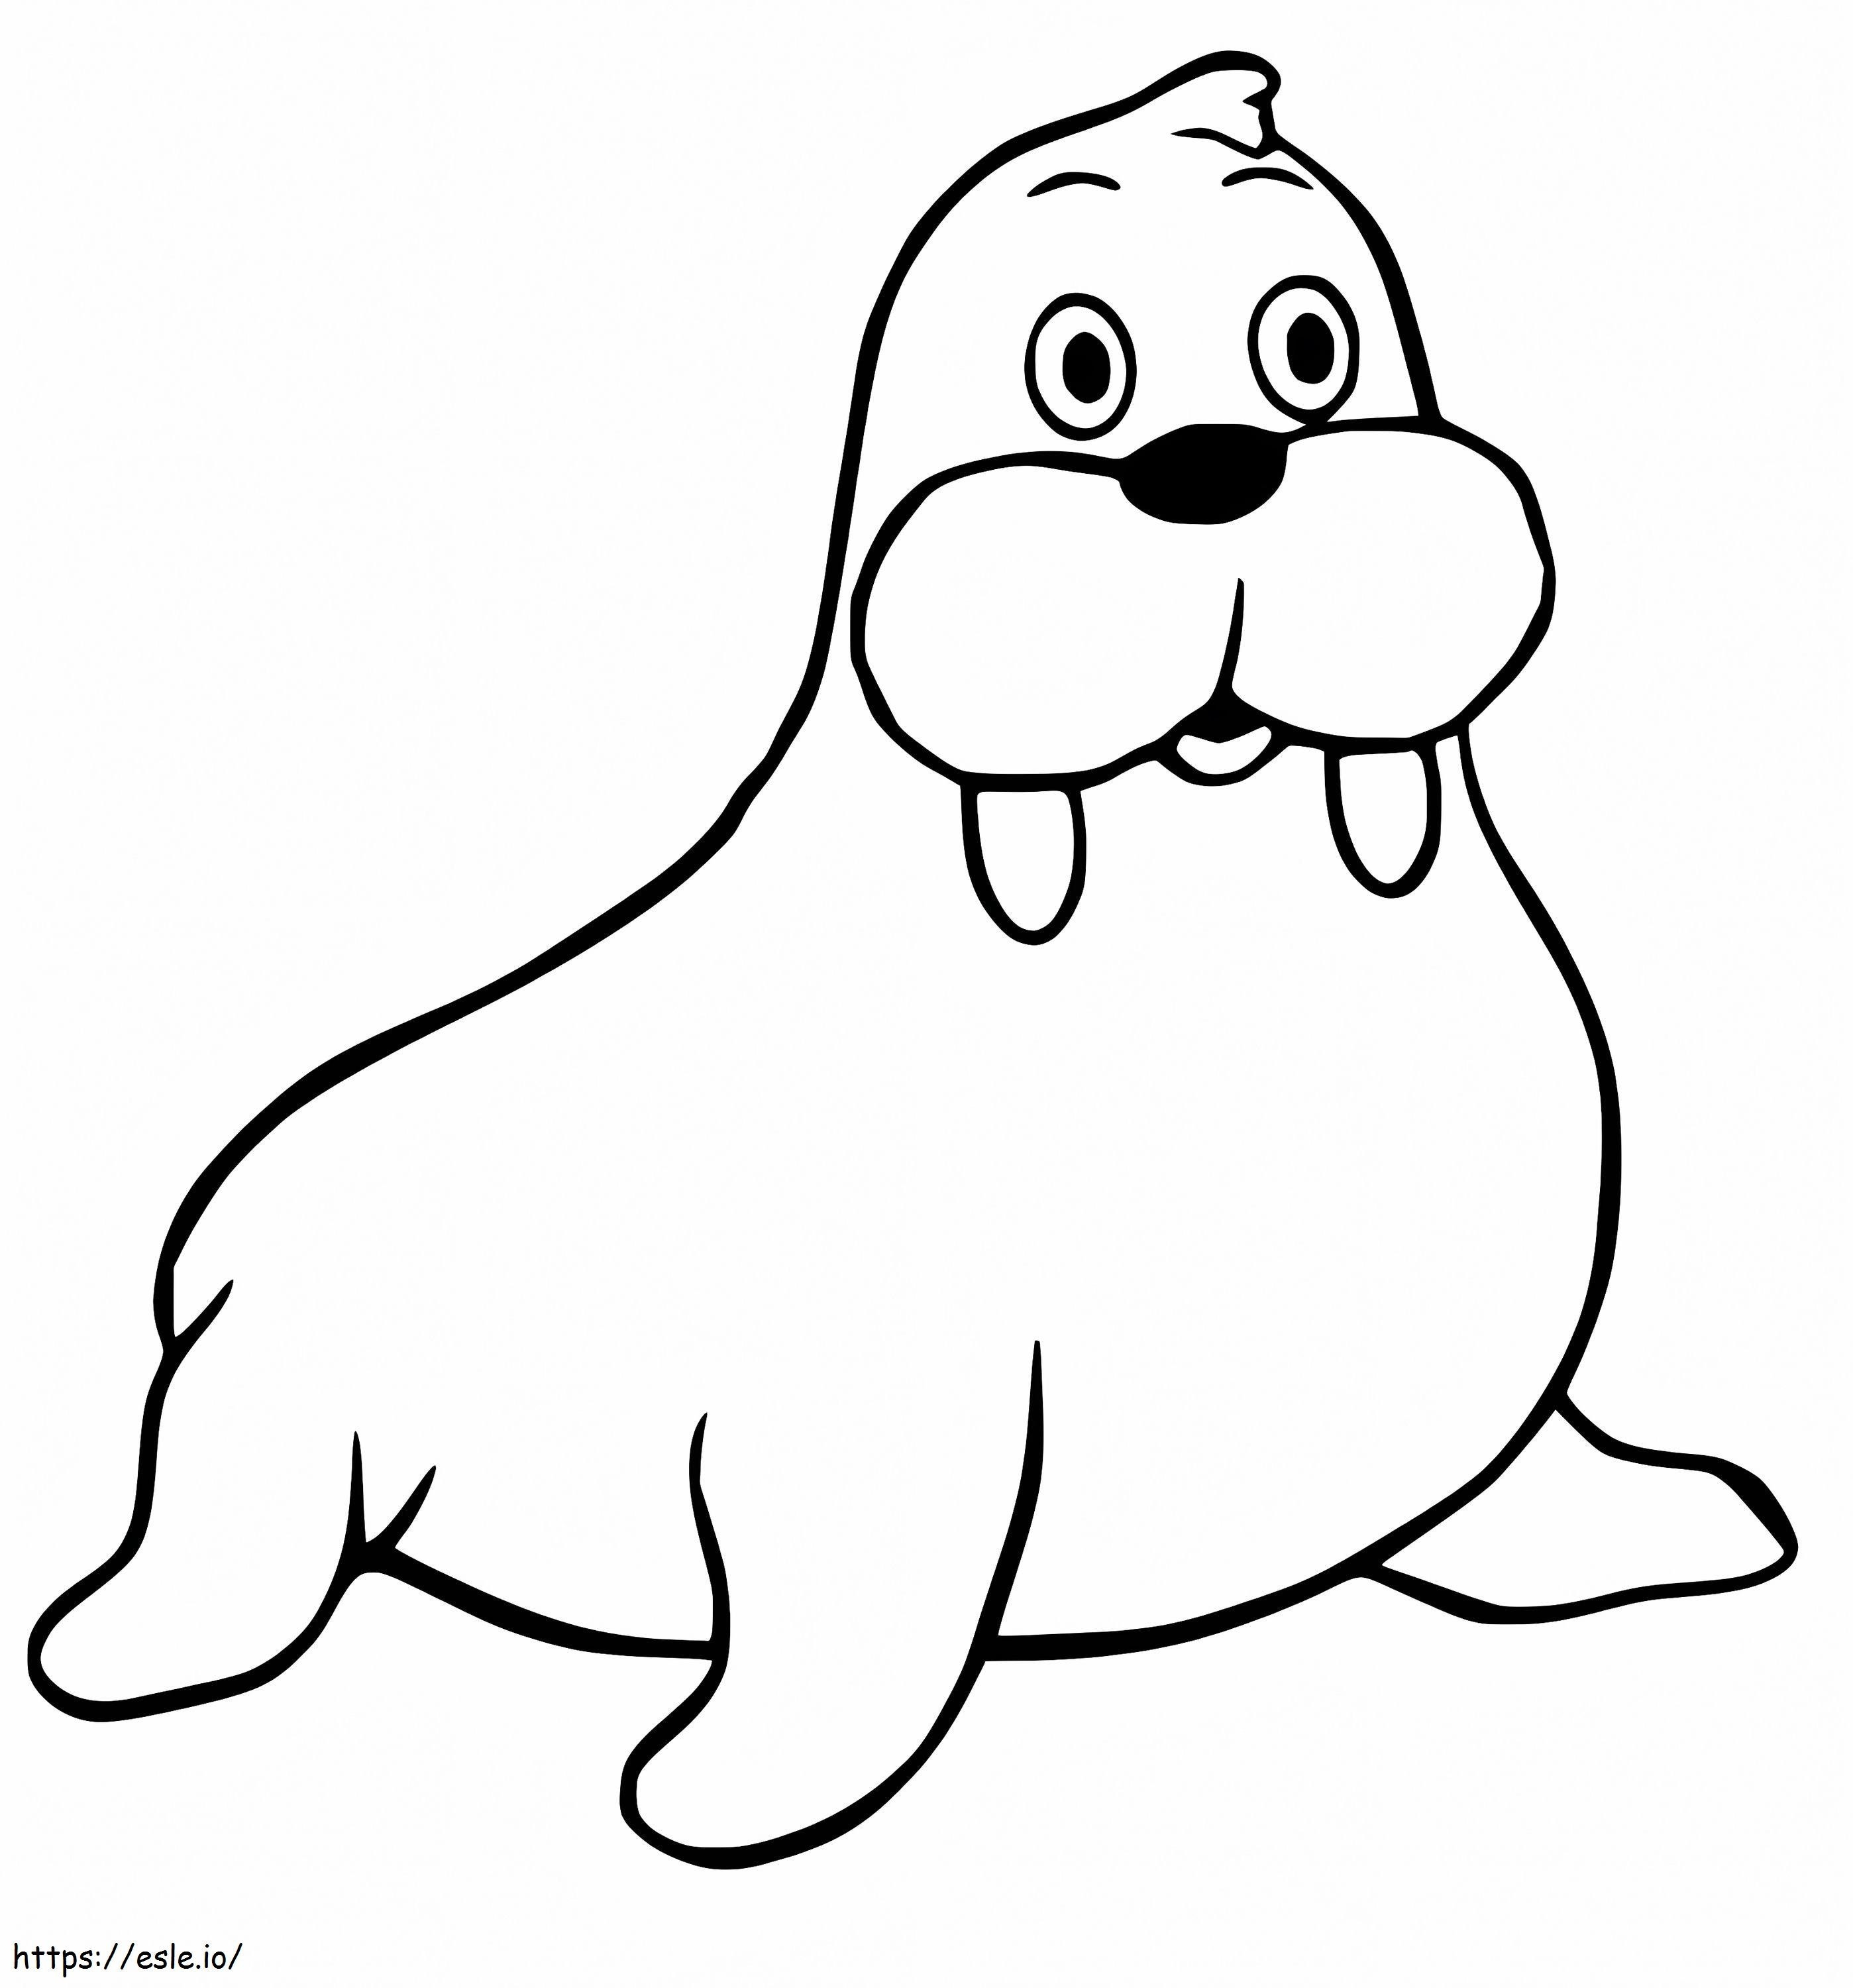 Walrus 3 coloring page